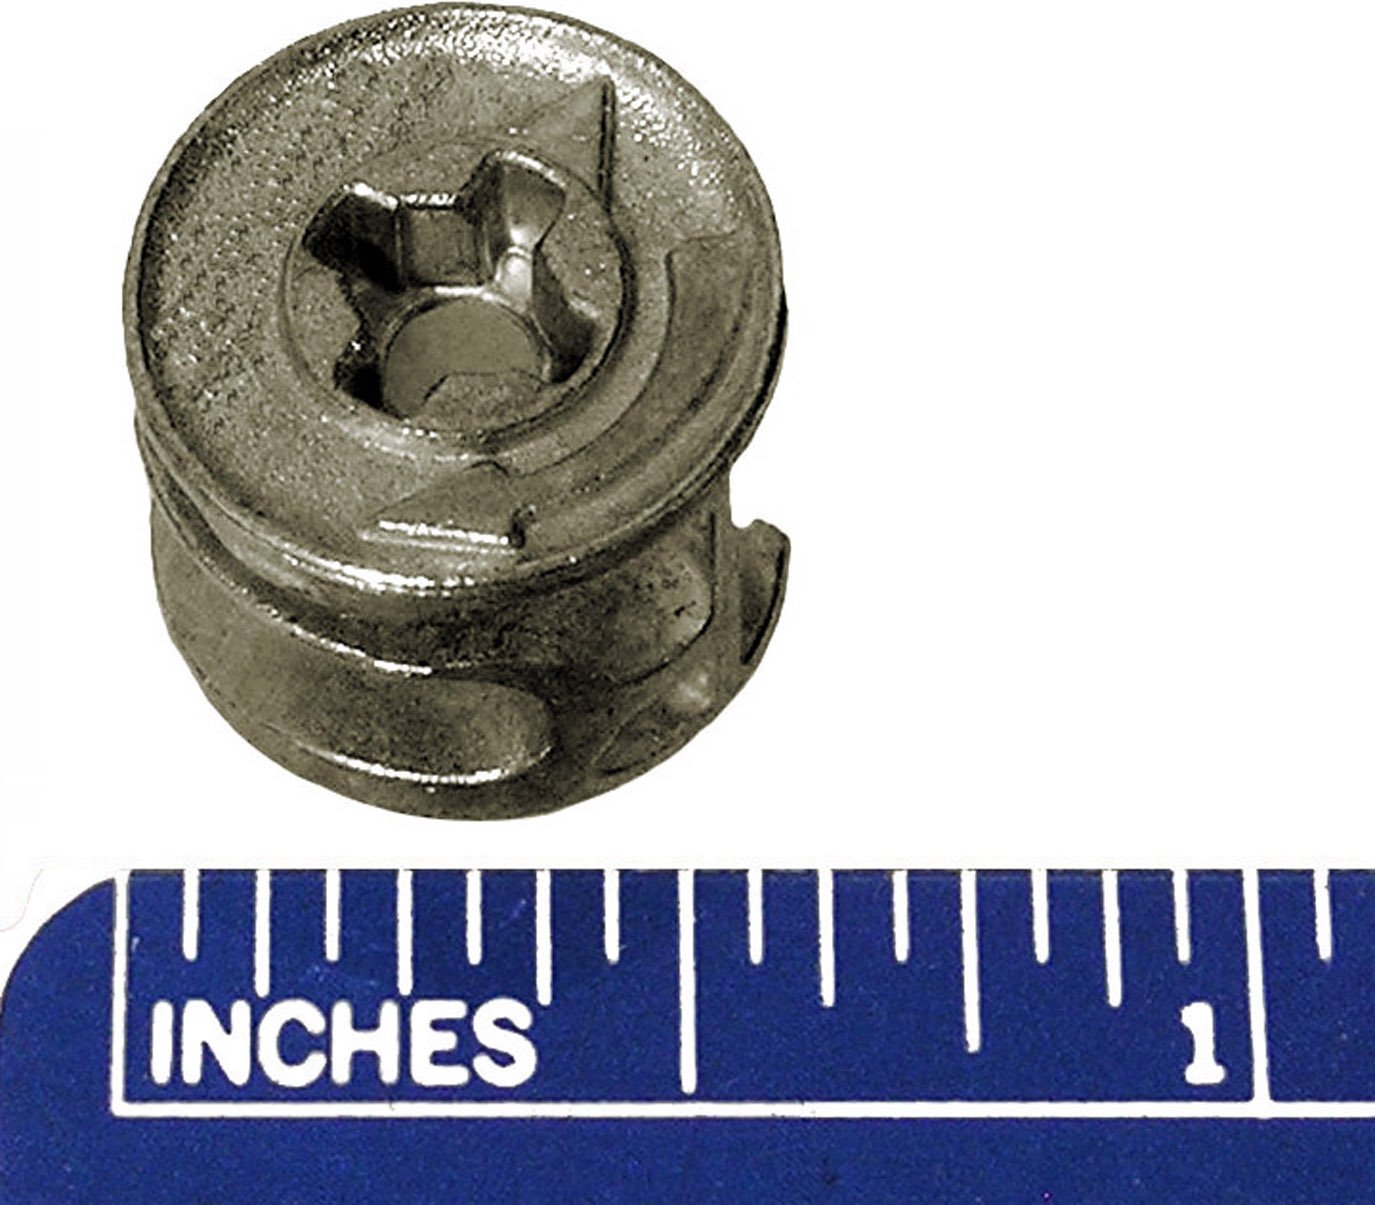 15mm x 12mm Cam Lock Disc Nut Furniture Connector Fastener (1 Package of 10 Pieces)